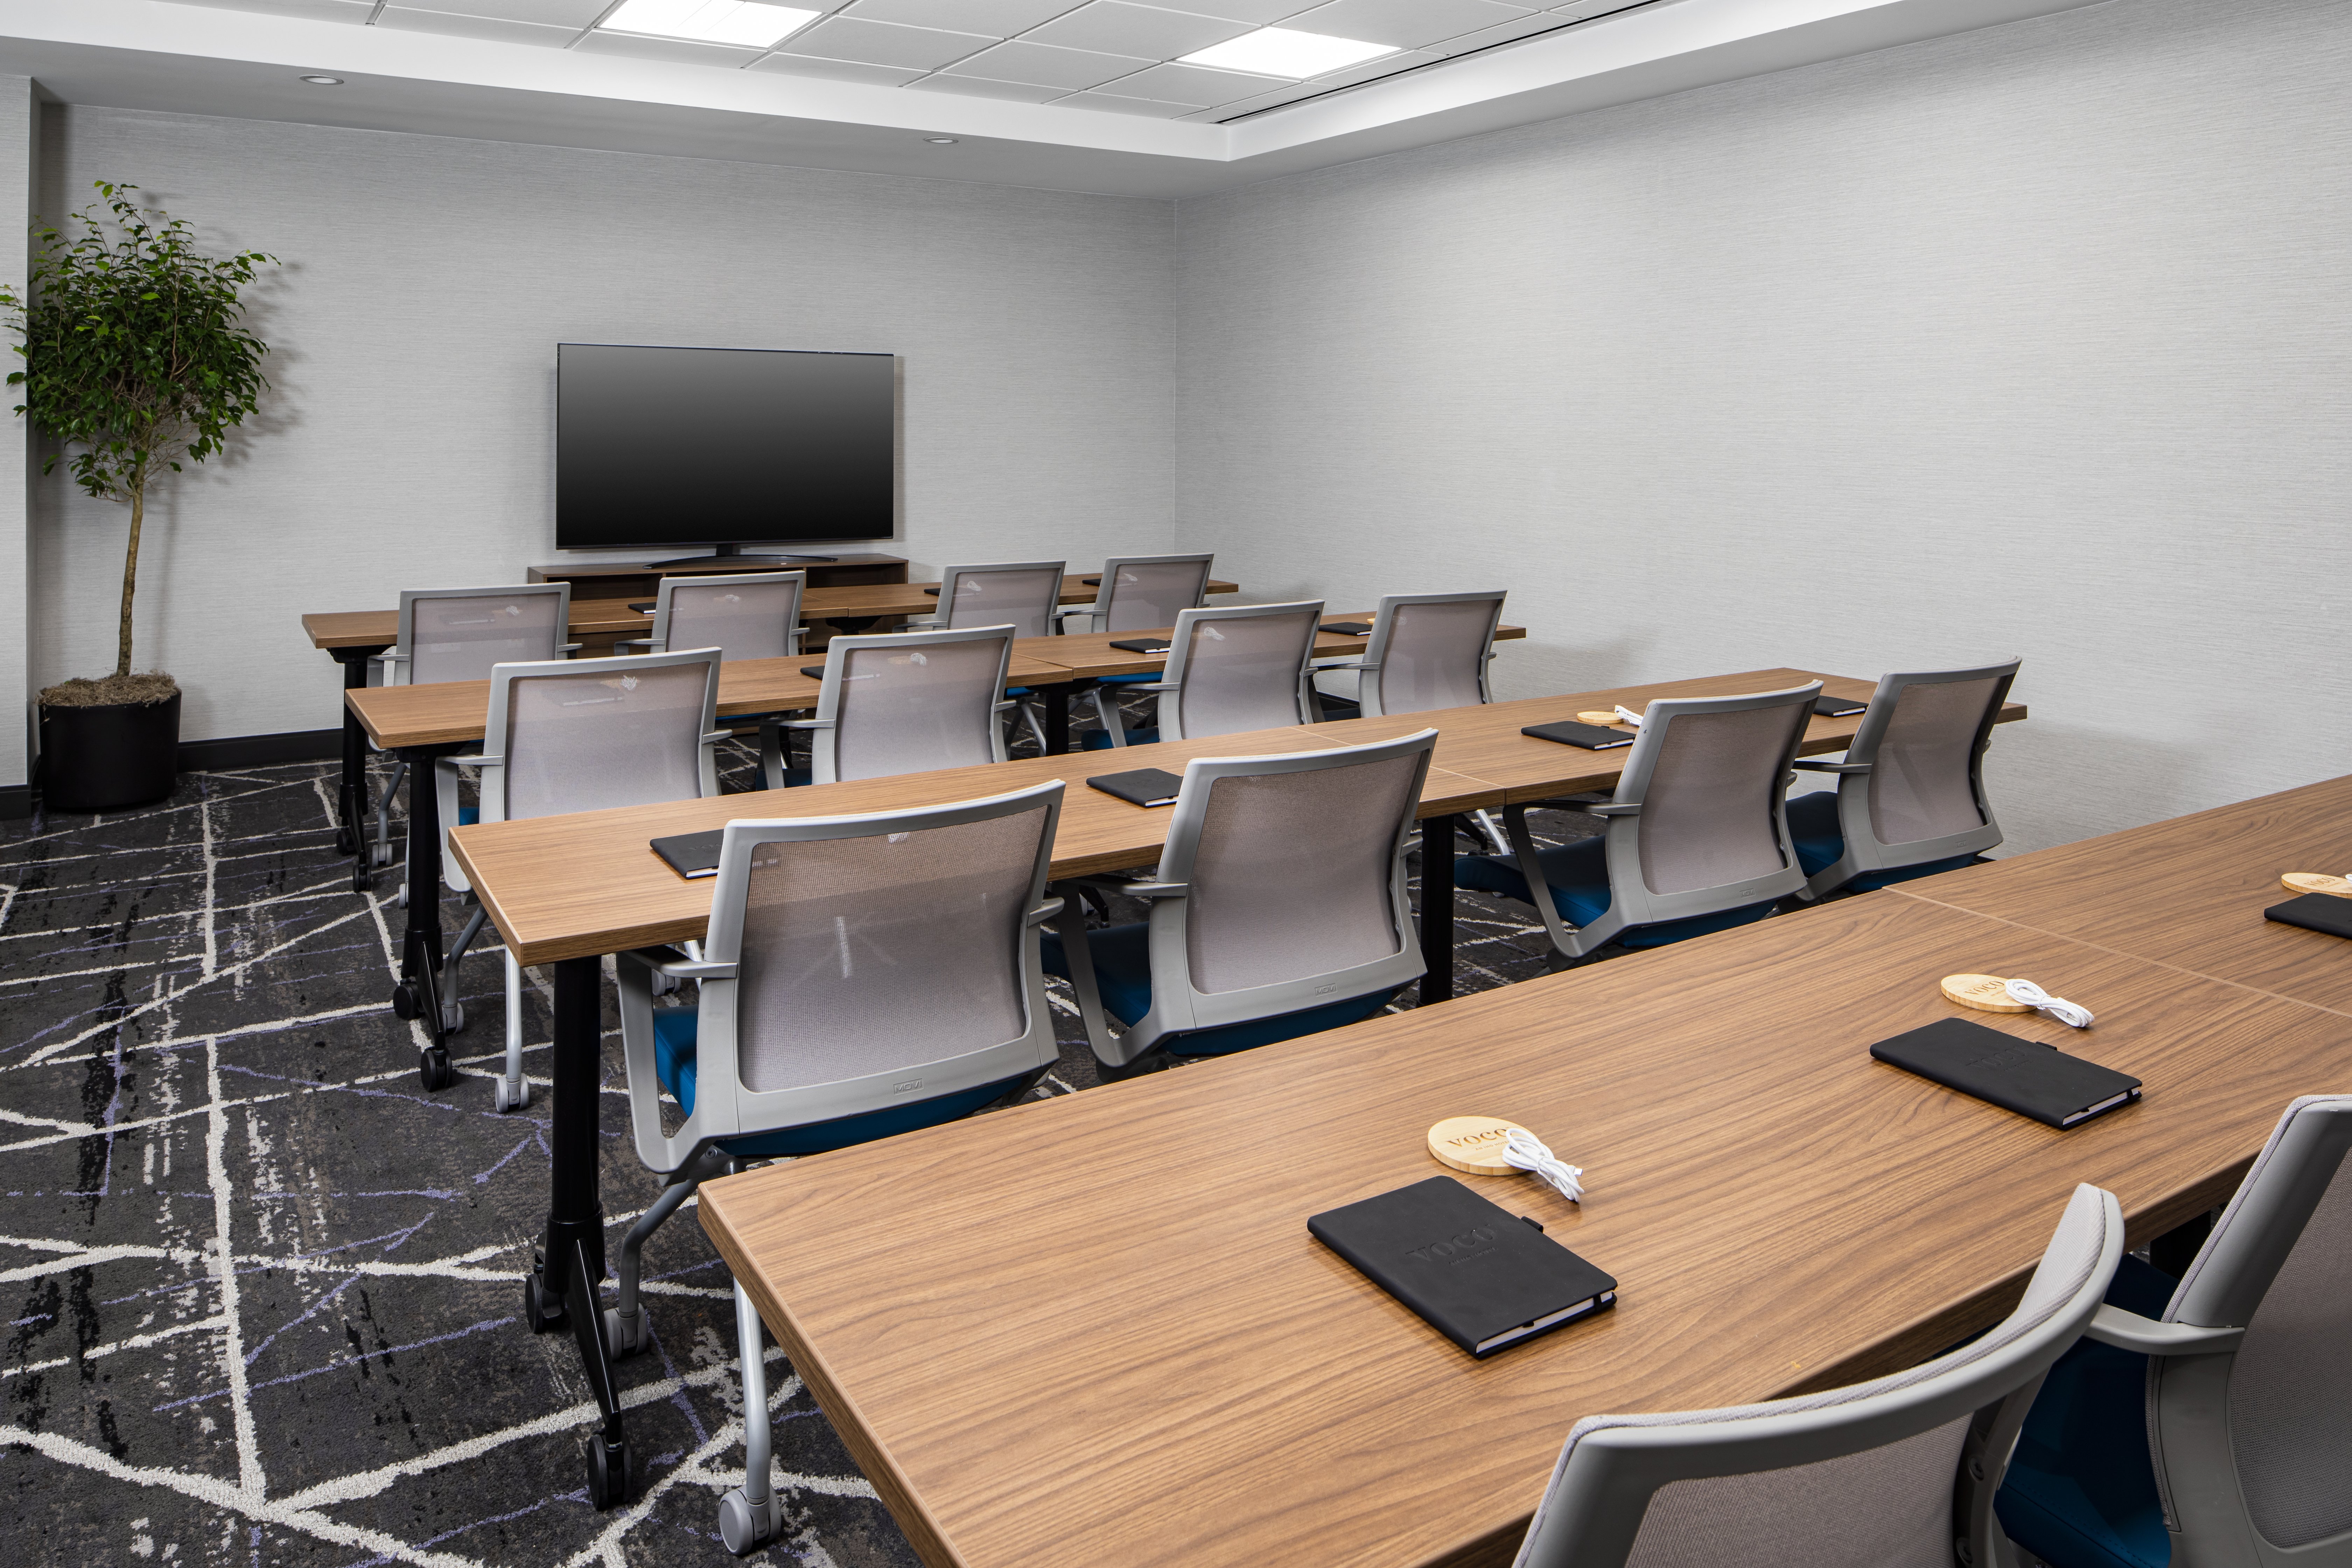 Ask about our flexible meeting space near Times Square.